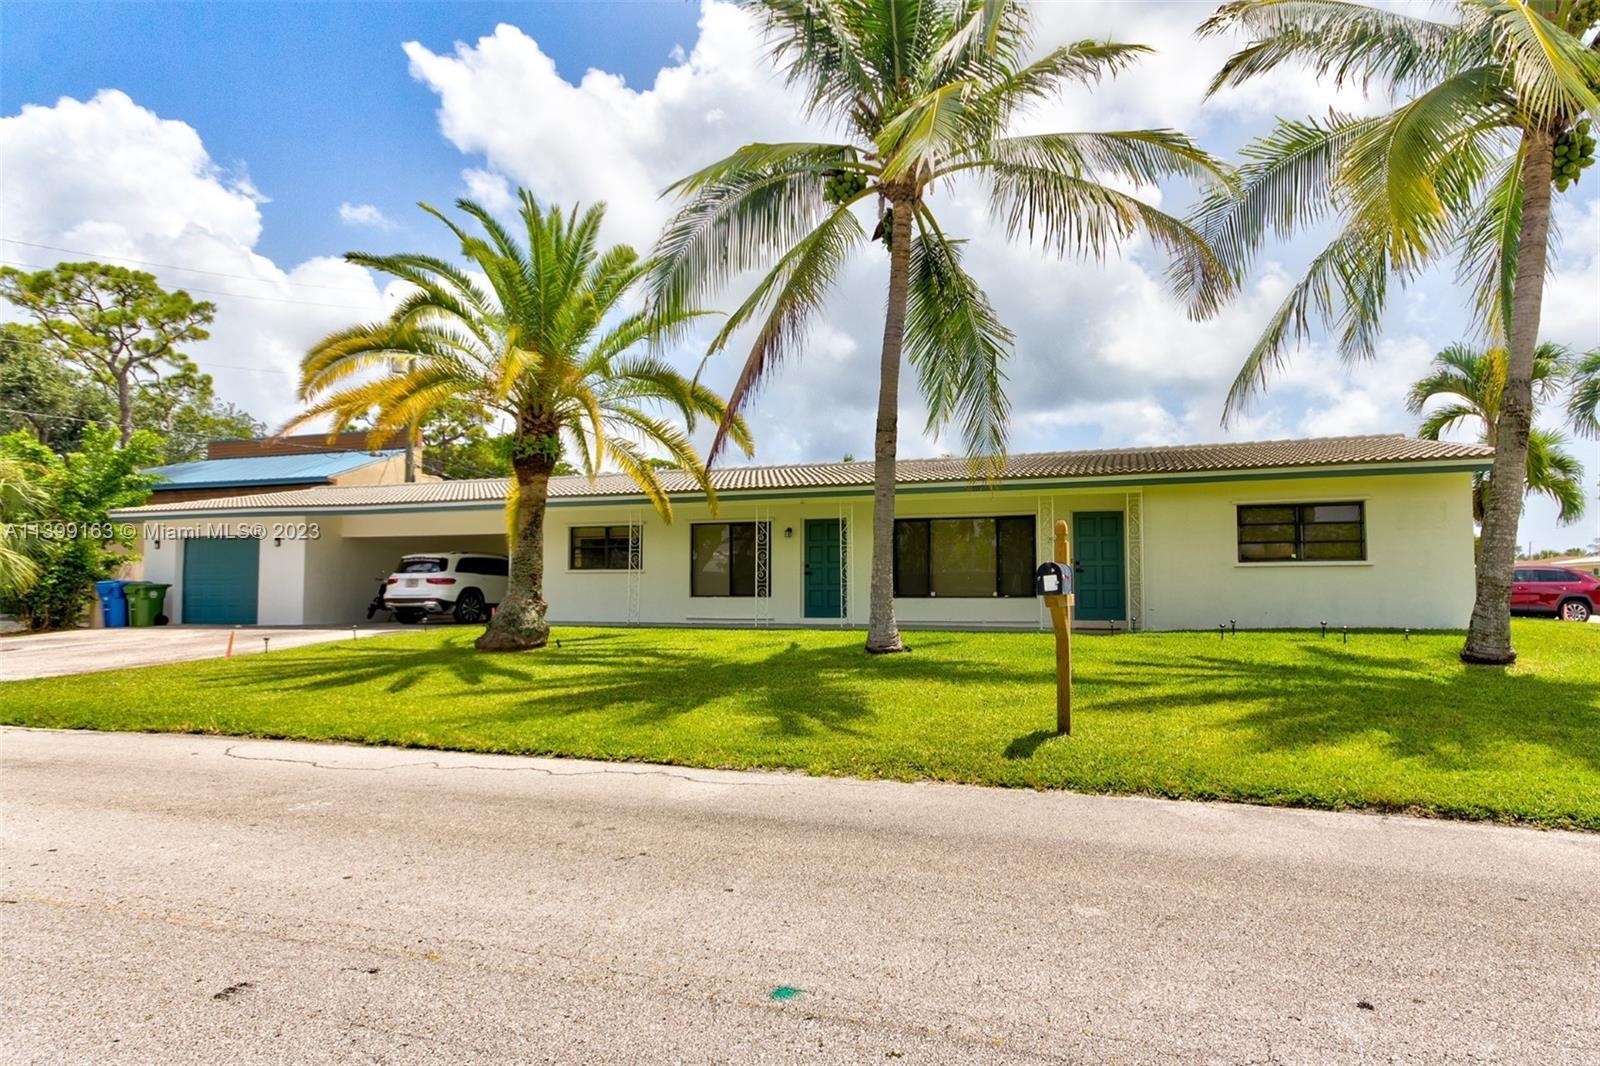 Introducing a stunning duplex in central Wilton Manors. This versatile property offers a prime locat